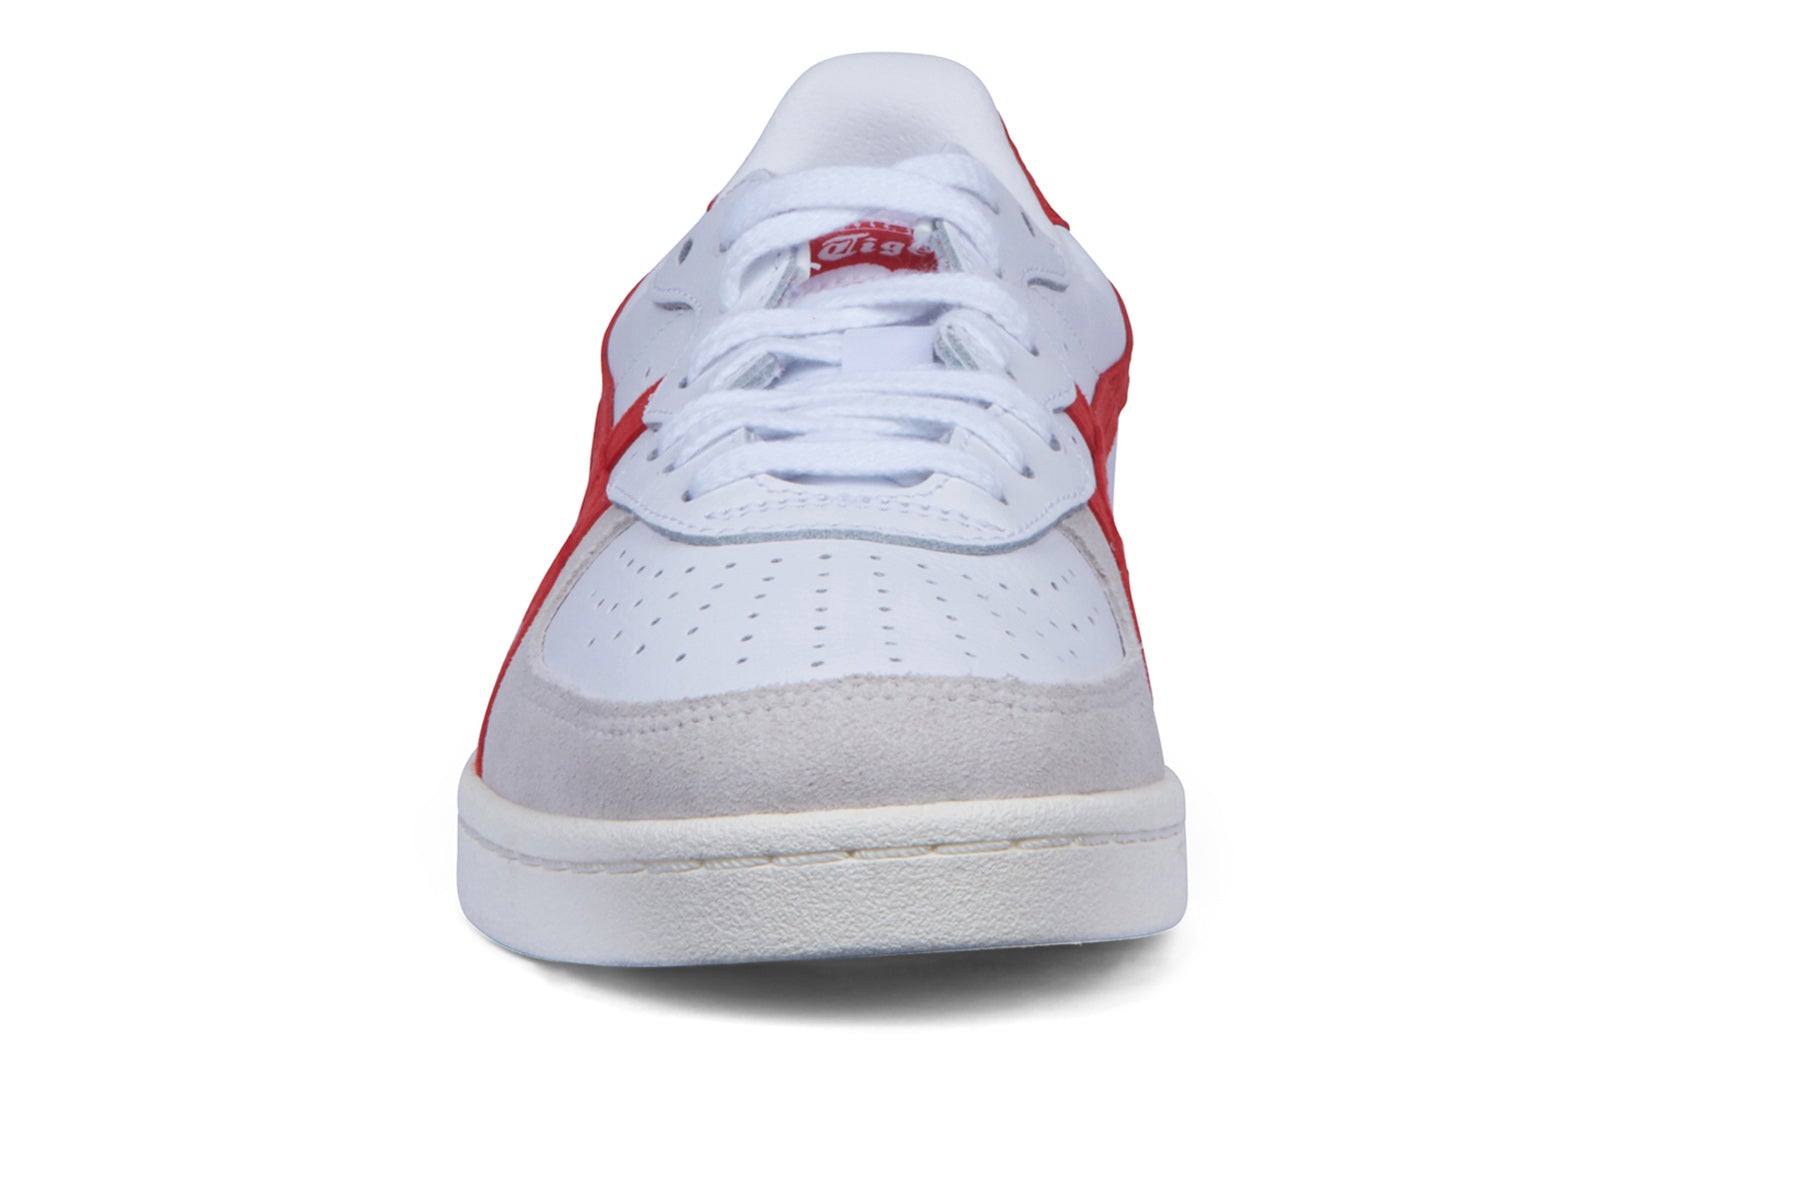 Onitsuka Tiger GSM - White/Classic Red